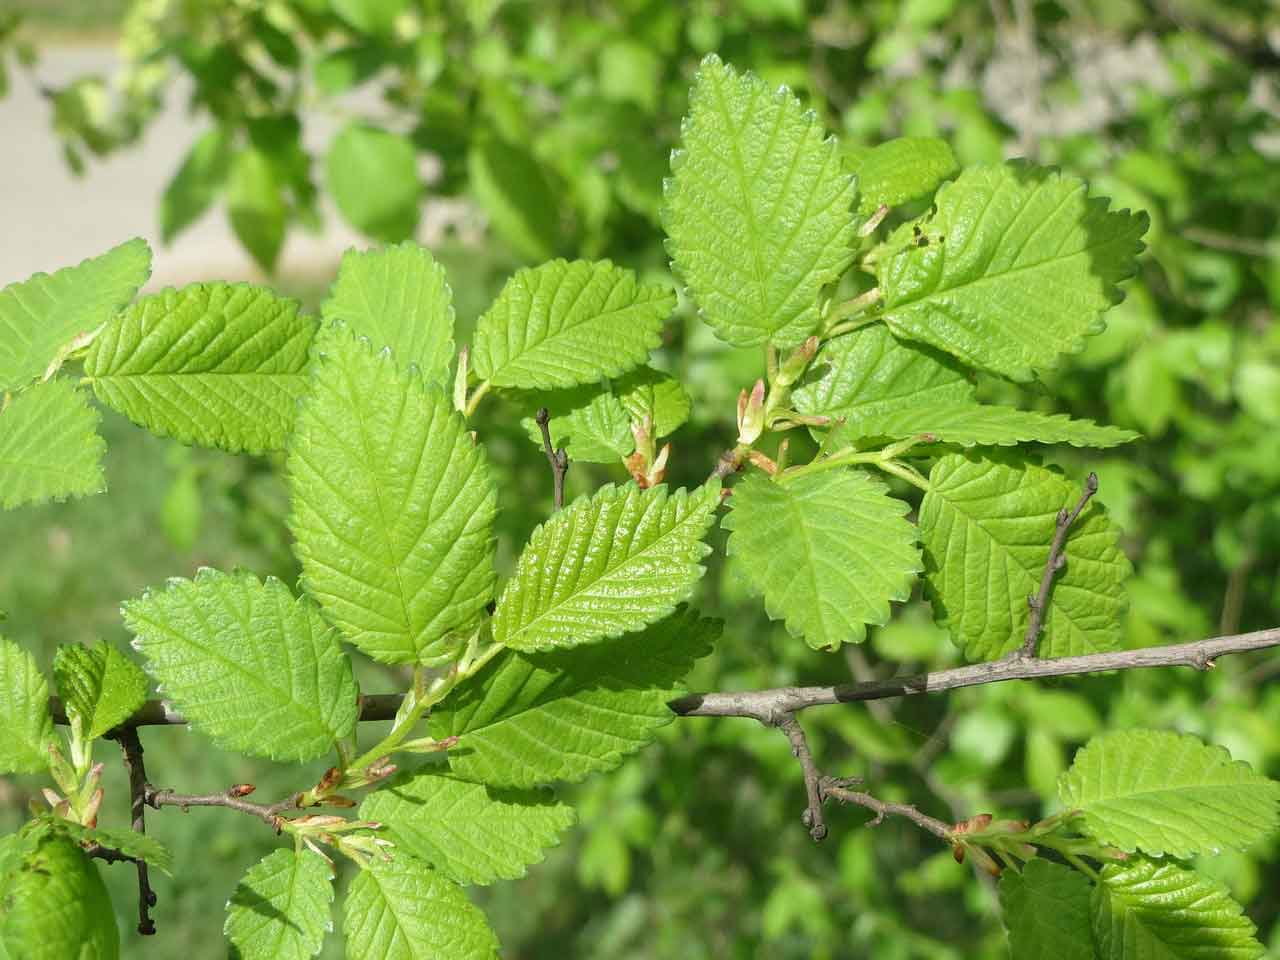 The leaves of a Slippery Elm tree